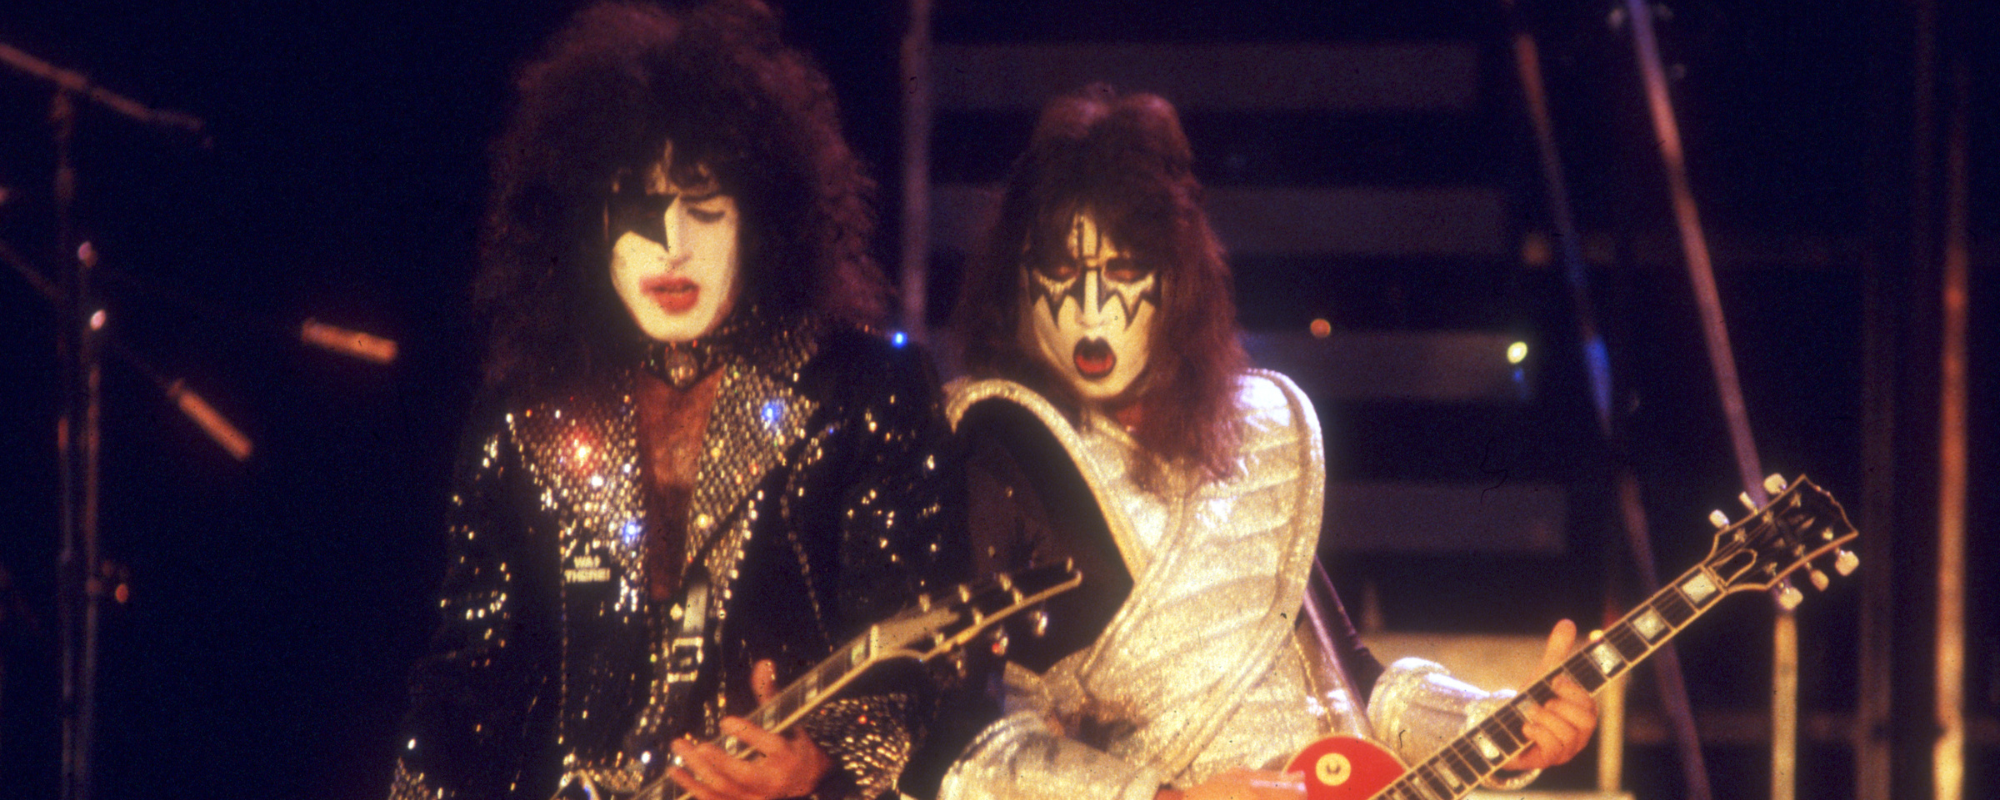 The 5 KISS Songs with the Bitchin’-est Guitar Riffs